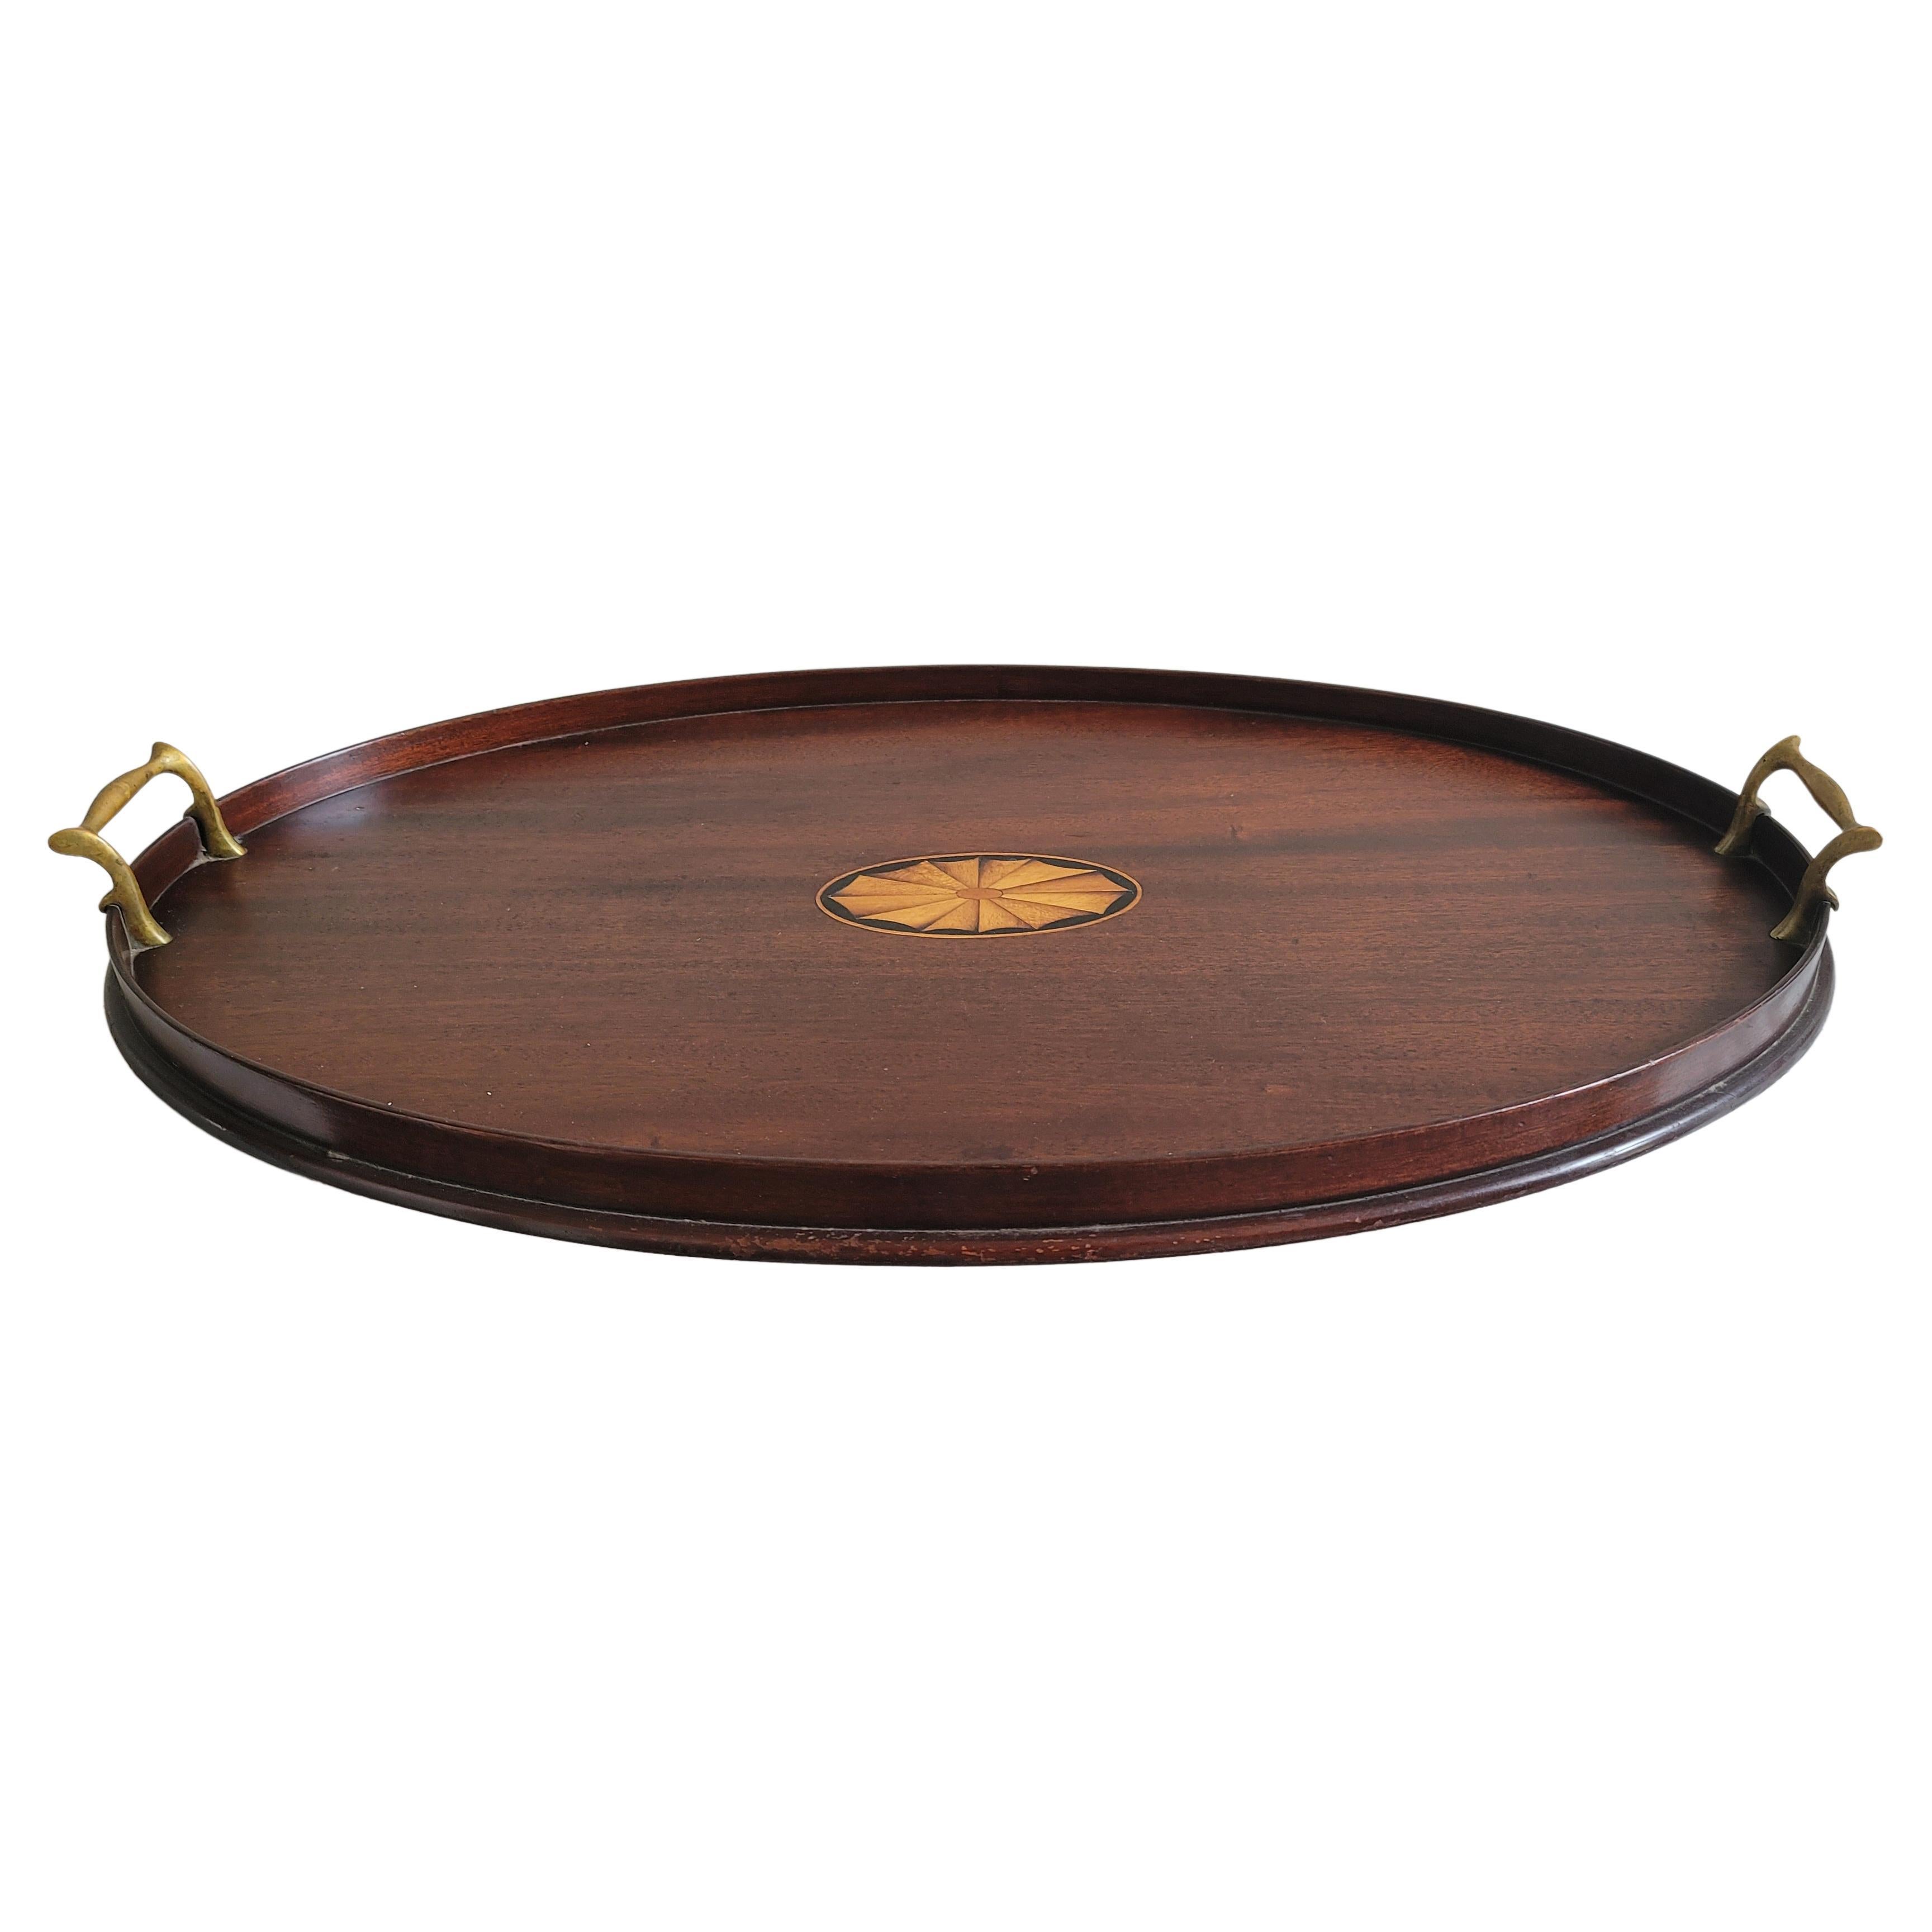 A Large, Finely Inlaid George III Victorian Mahogany Oval Butler's Tray